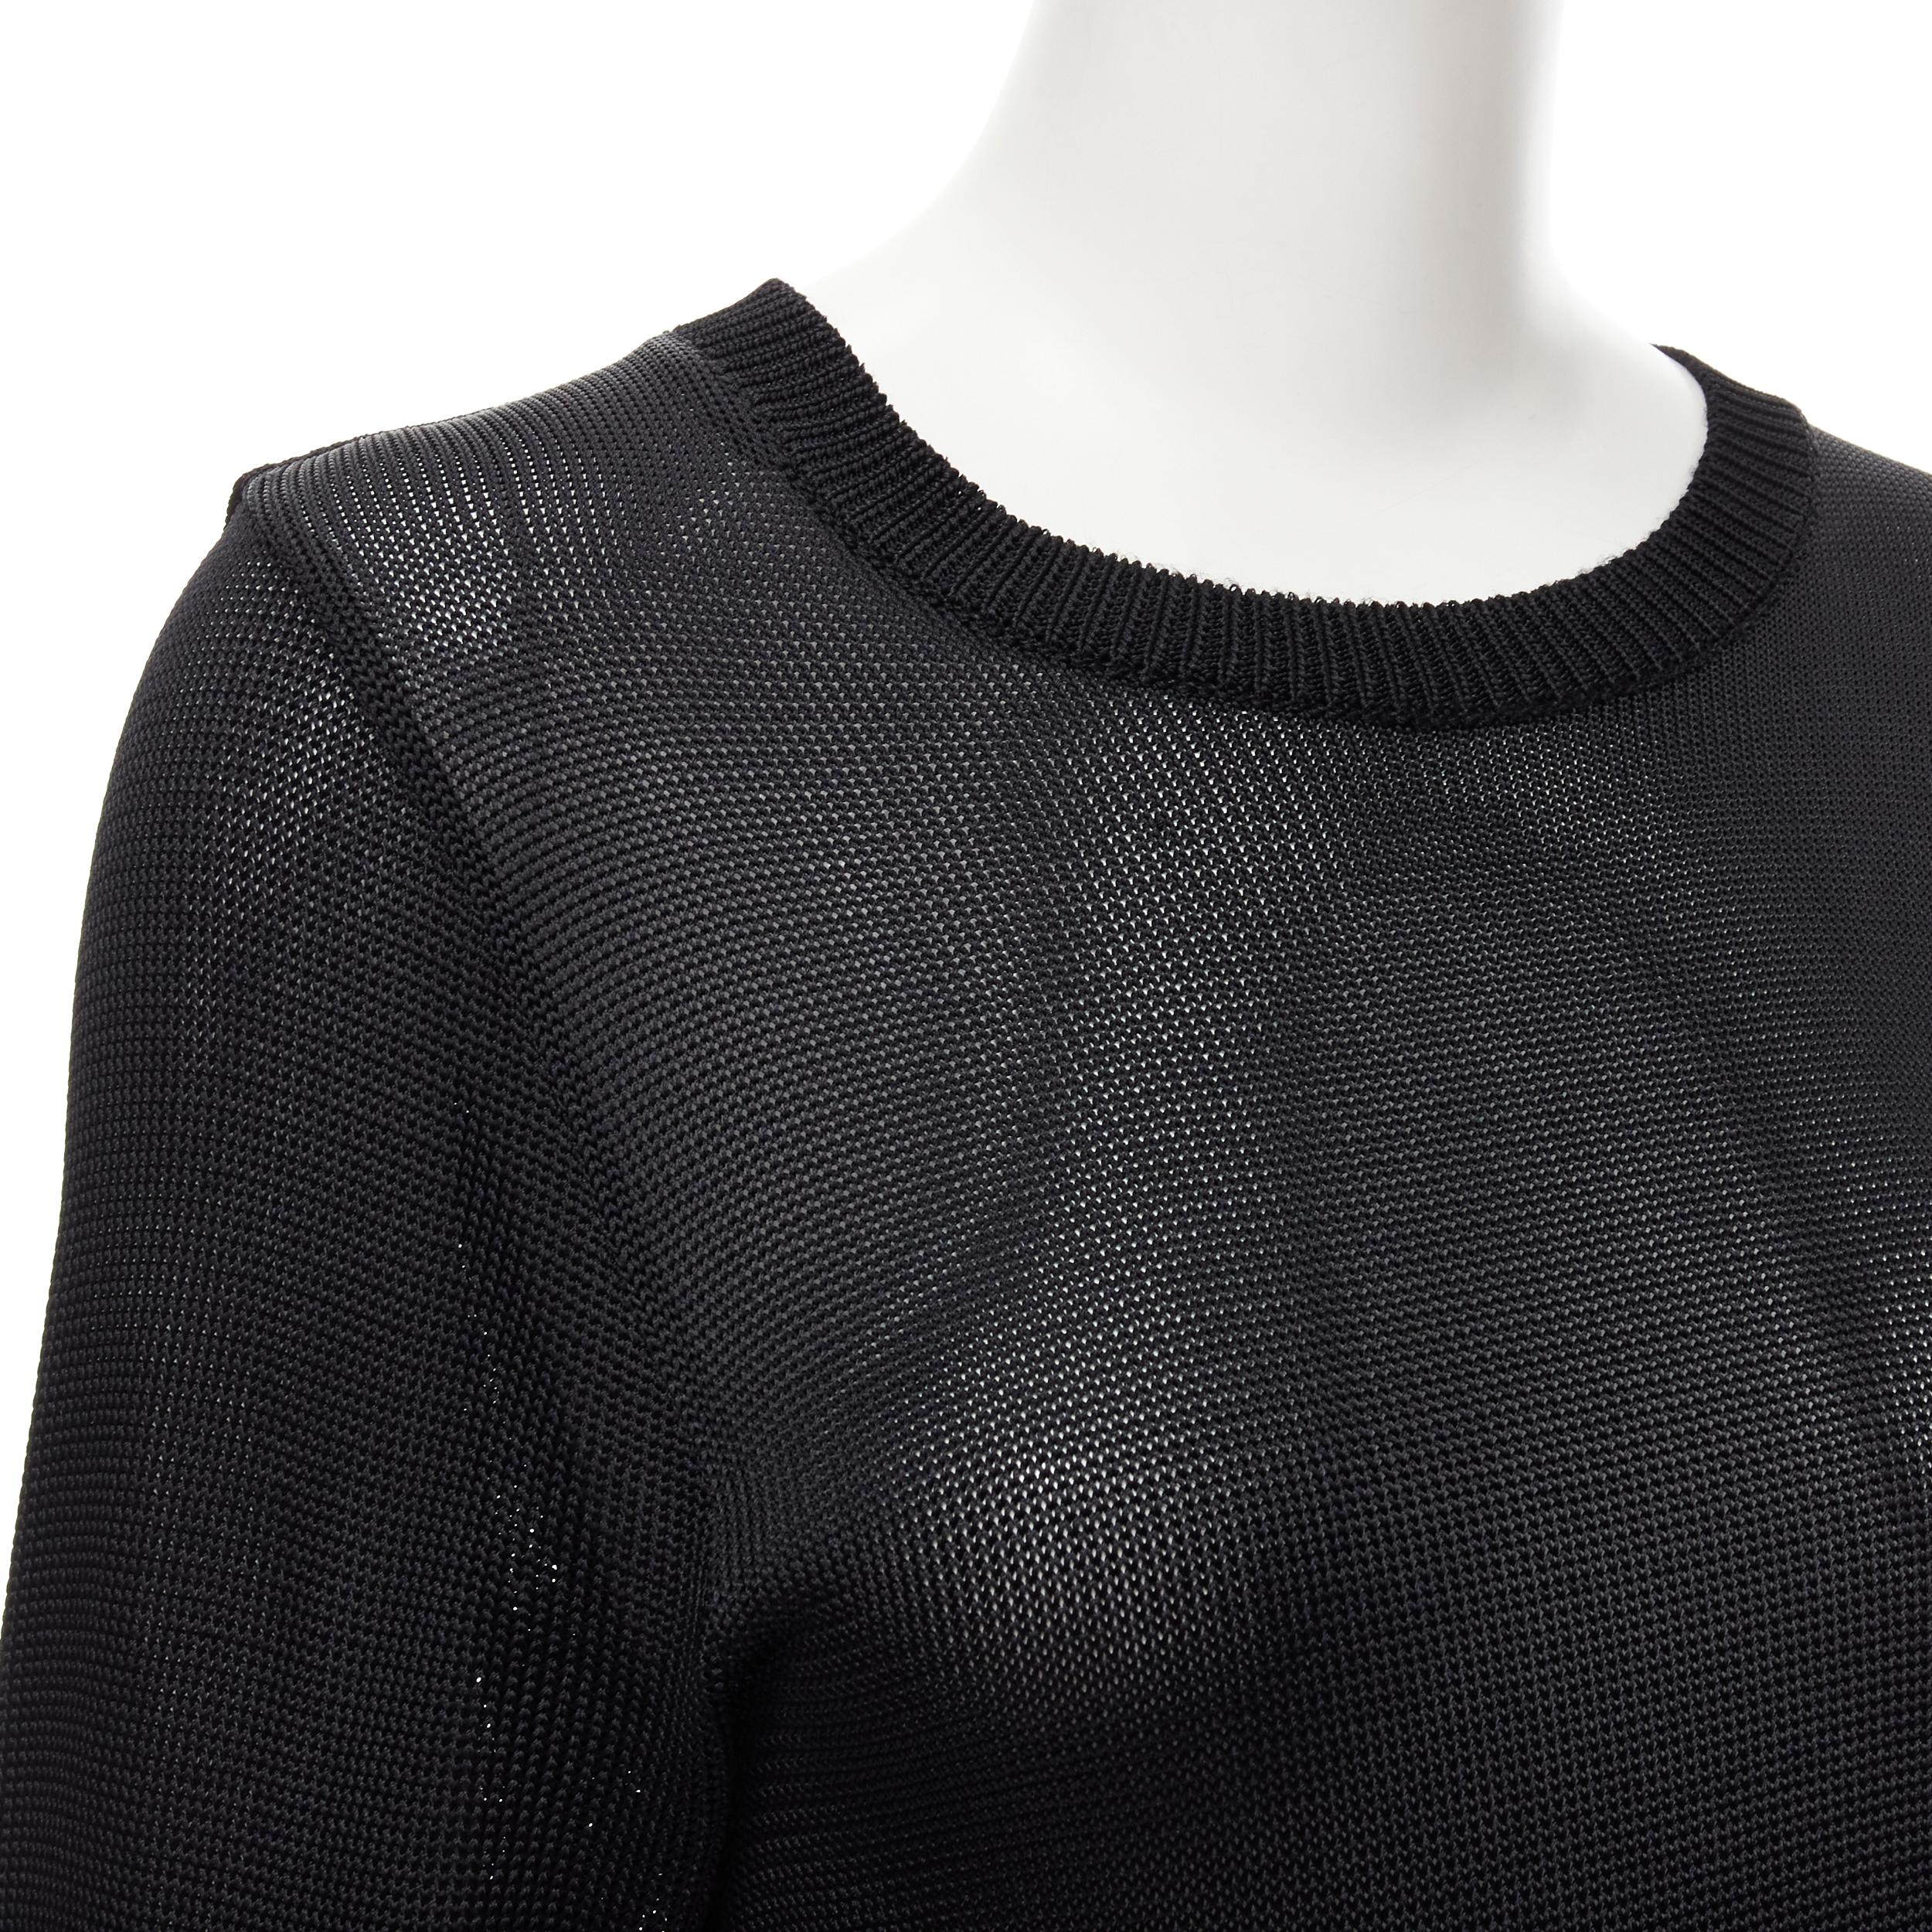 COMME DES GARCONS Vintage 1980s black knitted extra long sleeves sweater dress For Sale 2